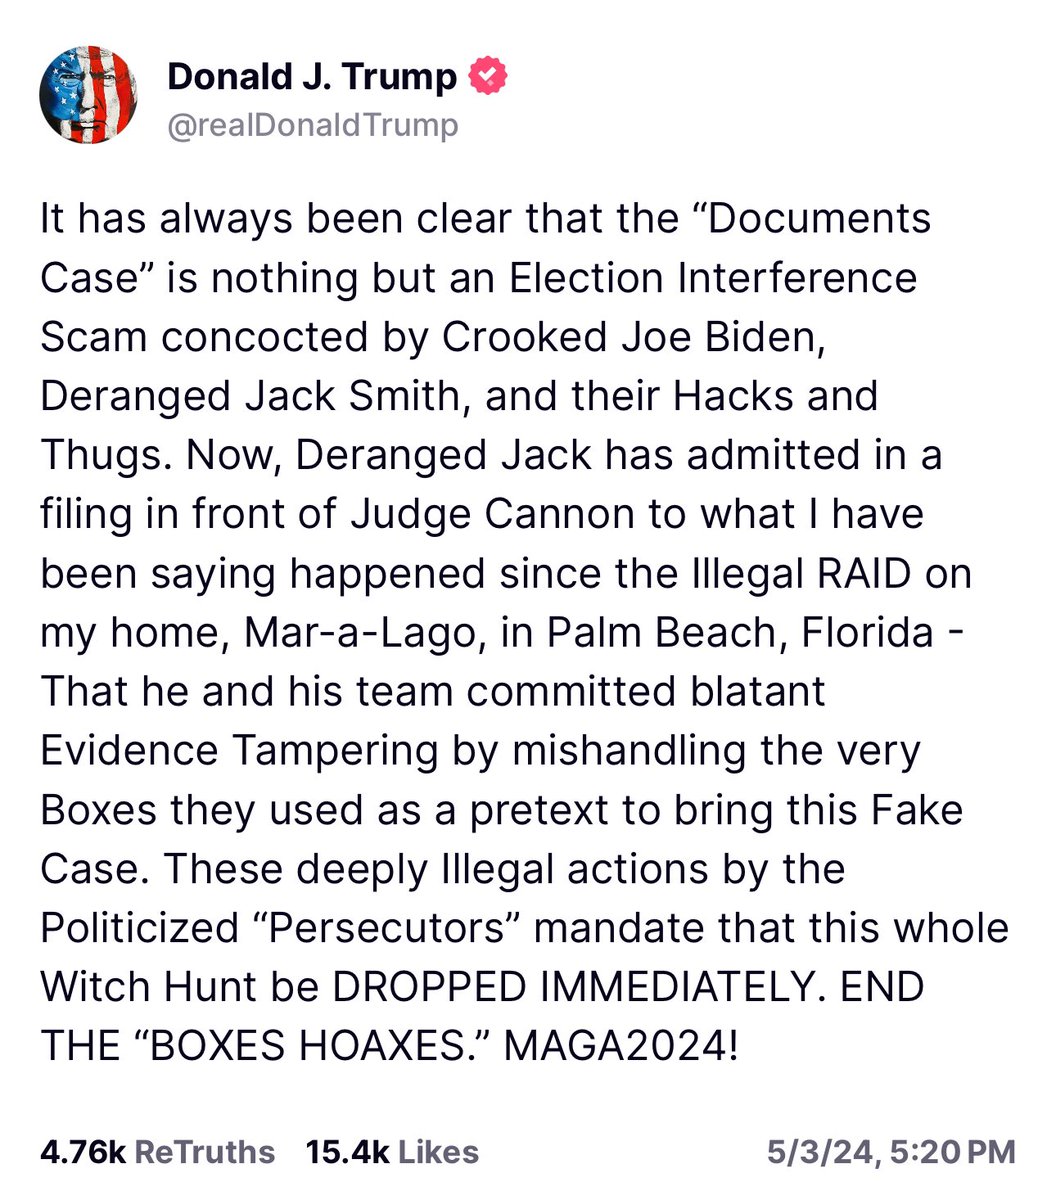 President Trump has a new statement out about “the Documents case” and the raid on Mar a Lago by the FBI. “END THE BOXES HOAXES. MAGA 2024.” —DJT